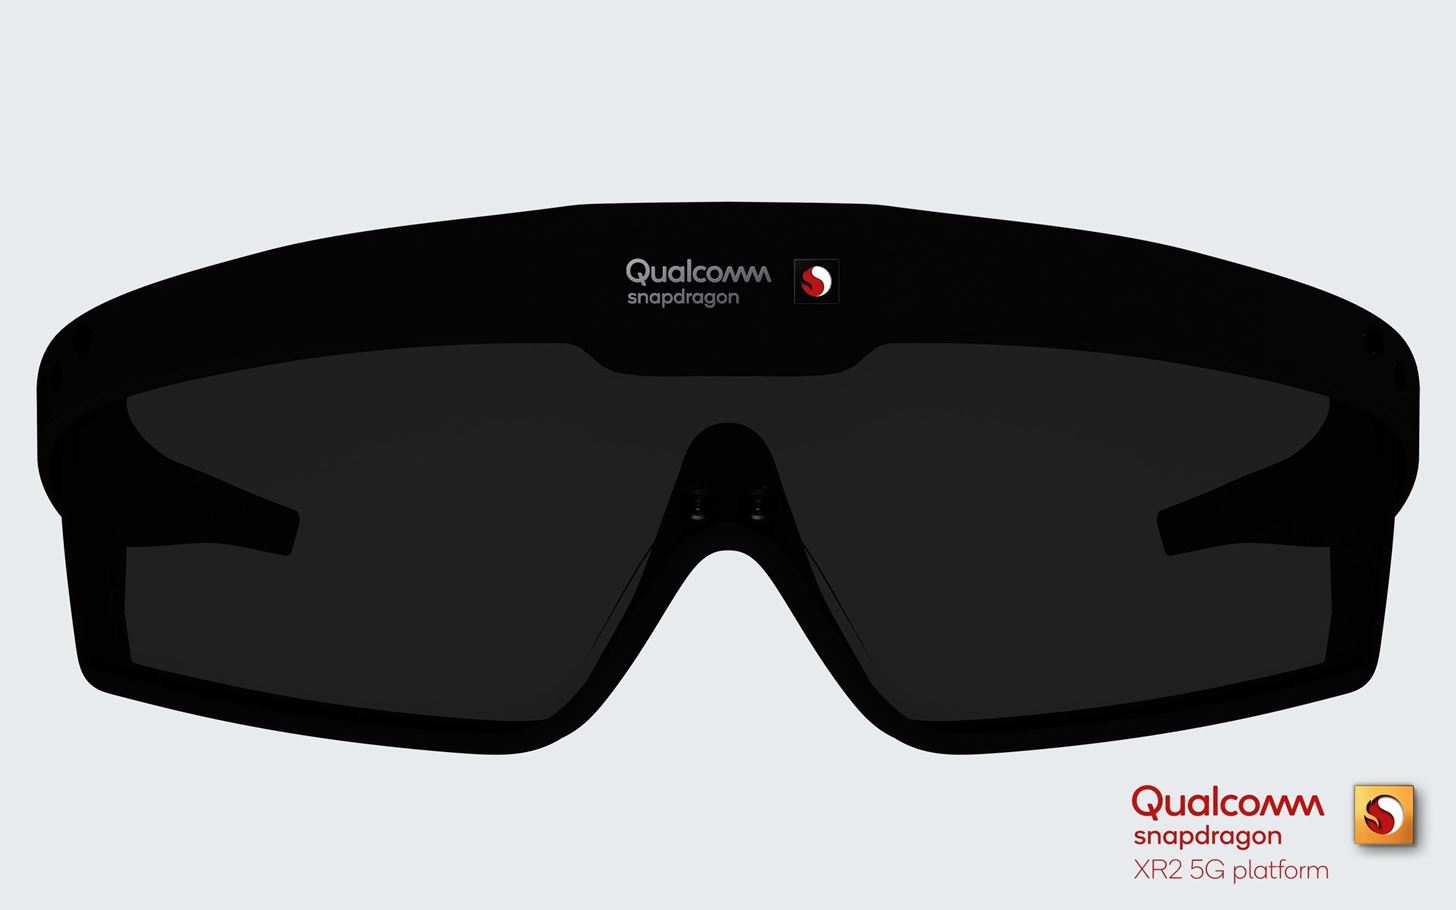 Qualcomm Launches Snapdragon XR2 5G for Next-Level AR Hardware & Reference Design for AR Wearables